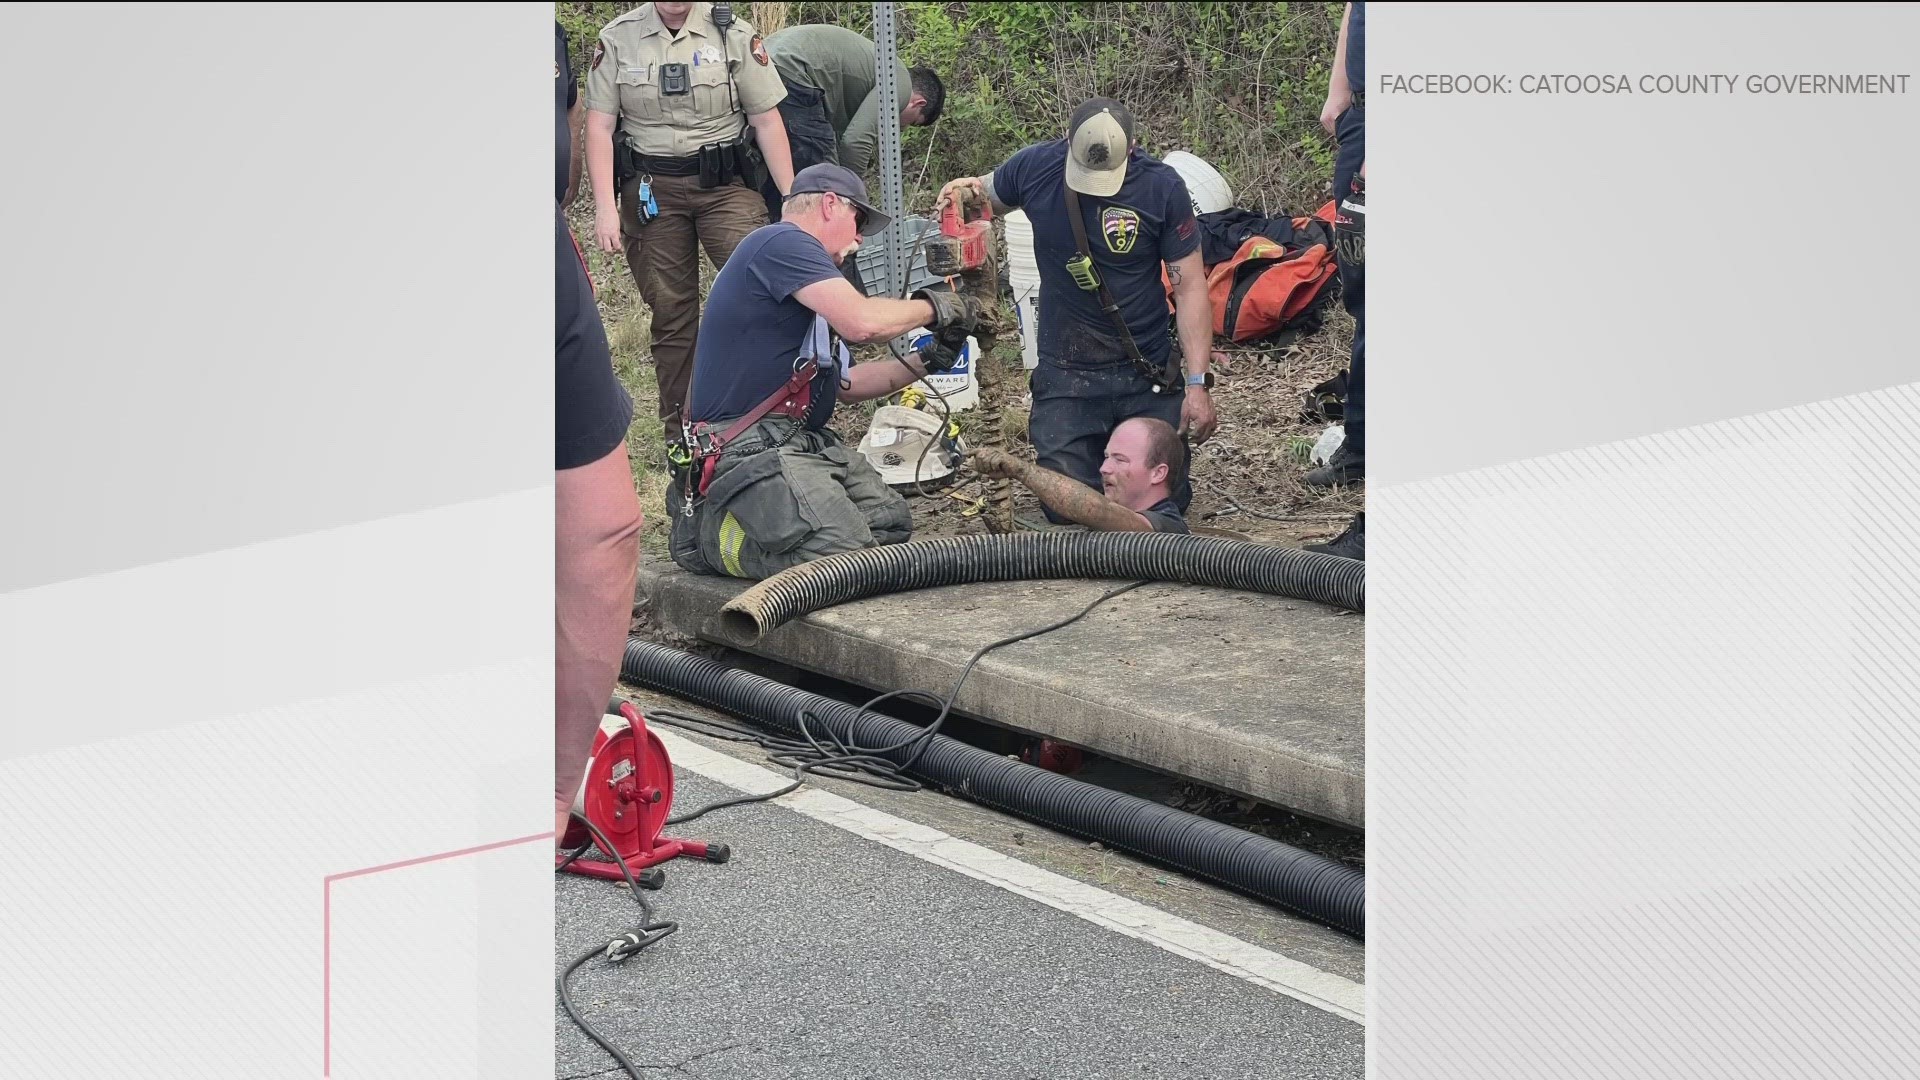 A Catoosa County man is free after being trapped in a drain pipe under Georgia Highway 2 for more than 9 hours.